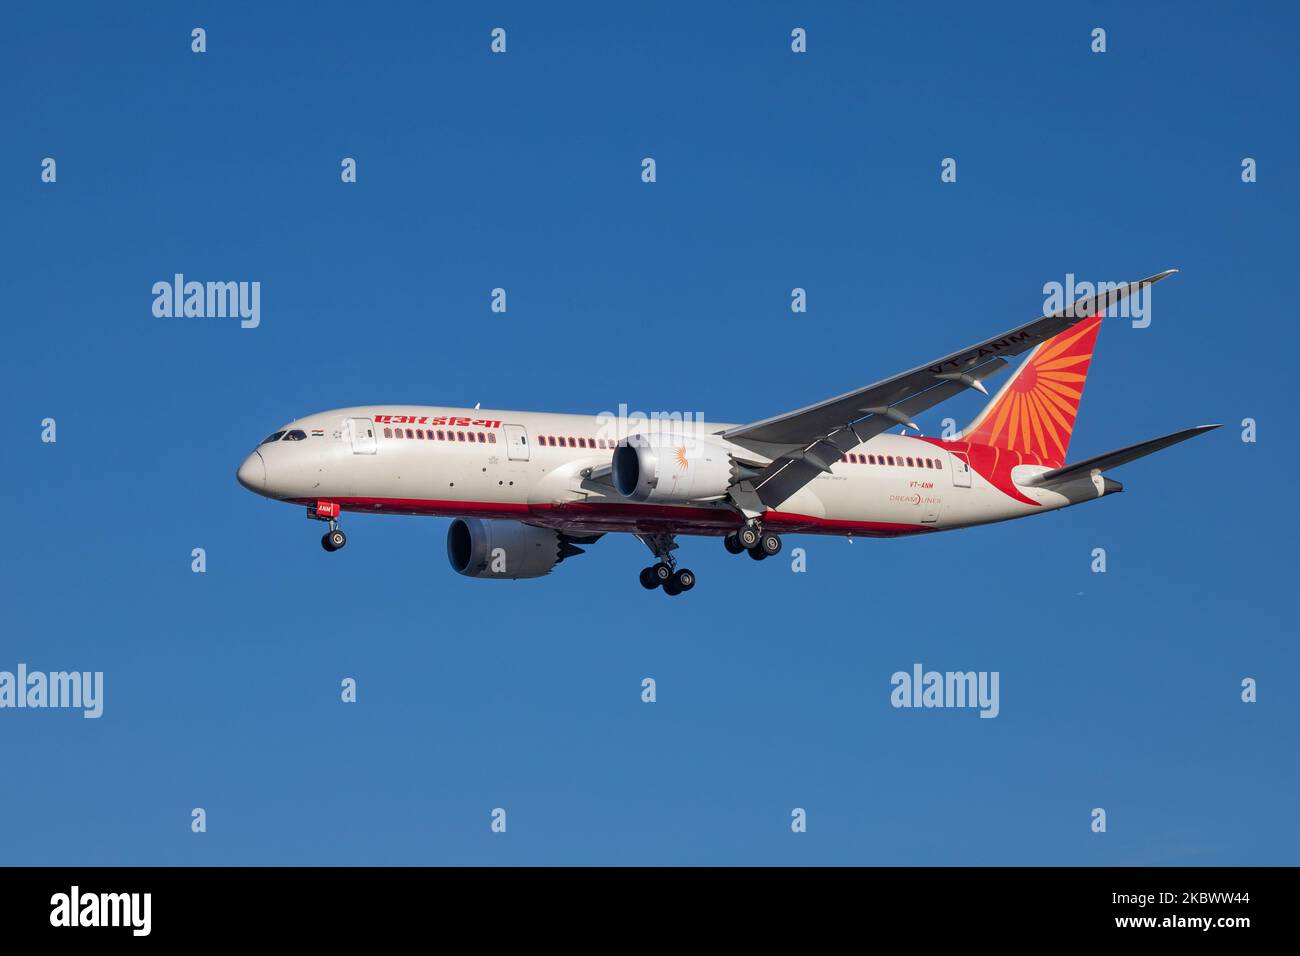 Air India Boeing 787 Dreamliner aircraft as seen on final approach flying for landing at London Heathrow International Airport LHR EGLL in England, United Kingdom on March 19, 2020. The modern and advanced B787-8 airplane has the registration VT-ANM and is powered by 2x GEnx-1B jet engines. AirIndia AI AIC is the flag carrier of India with headquarters at New Delhi and main hub at Delhi Indira Gandhi DEL airport, the airline is government-owned and member of Star Alliance aviation team. On August 7, 2020 an Air India subsidiary, Air India Express flight no AXB1344 had an accident skidded the r Stock Photo